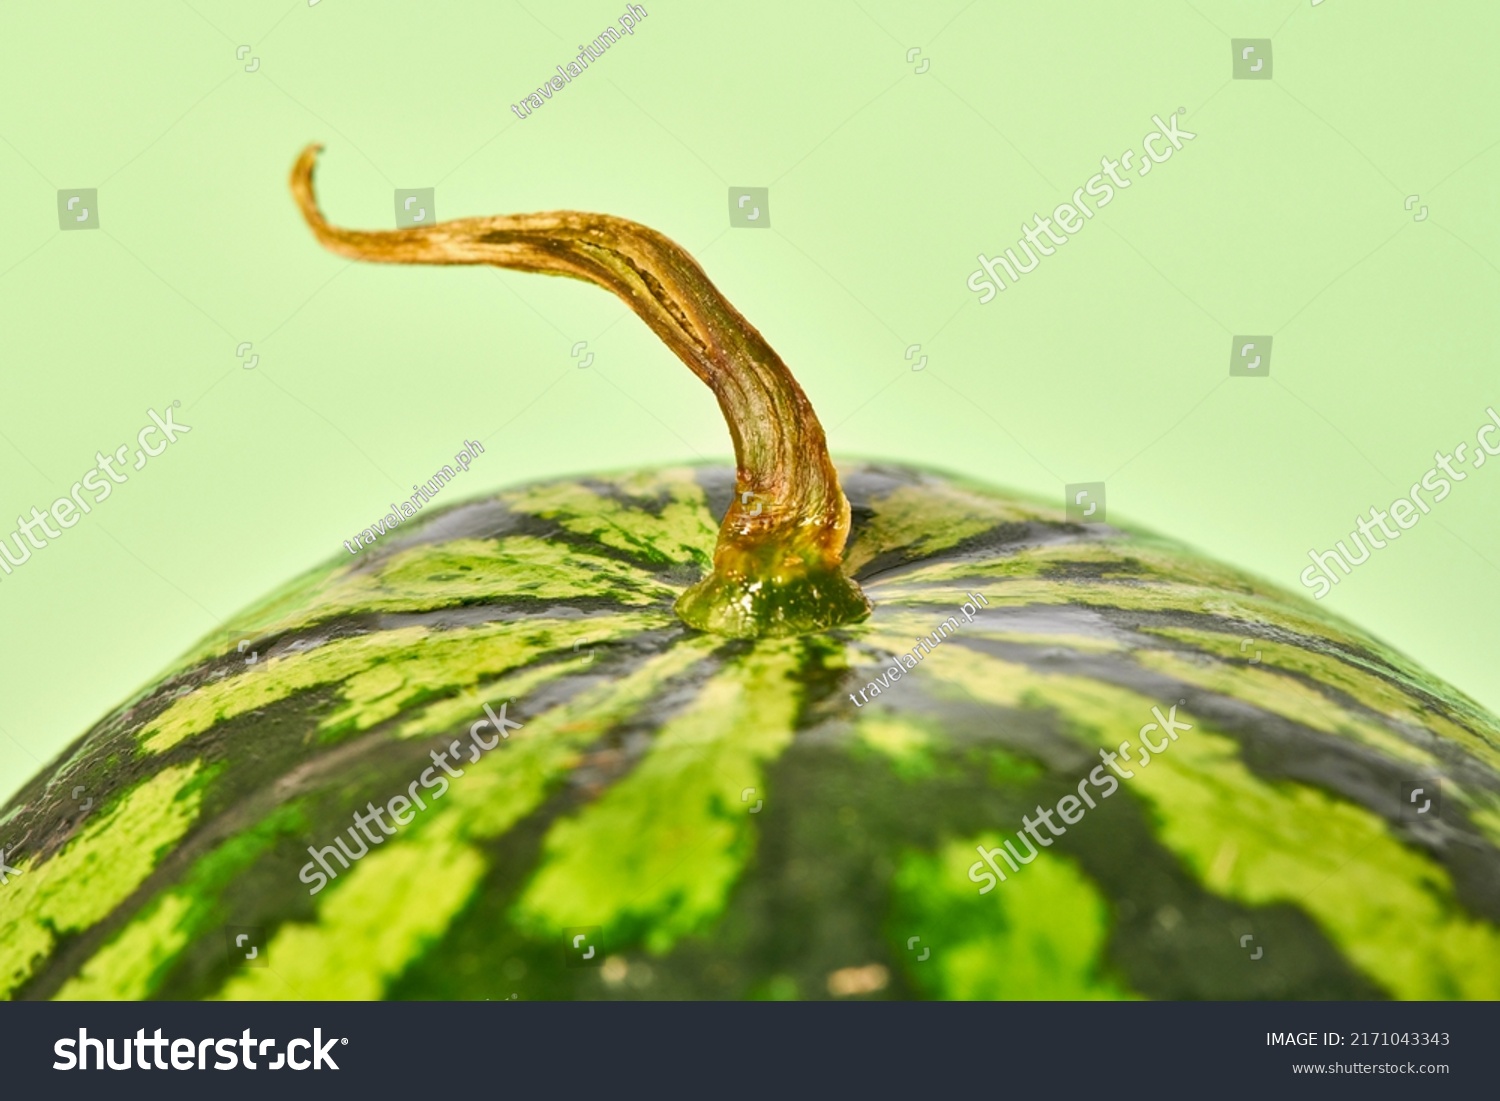 Tasty and juicy watermelon close up with dry tail on green background, delicious summer fruit. Striped ripe water melon berry with brown branch, sweet summer dessert for stay hydrated #2171043343